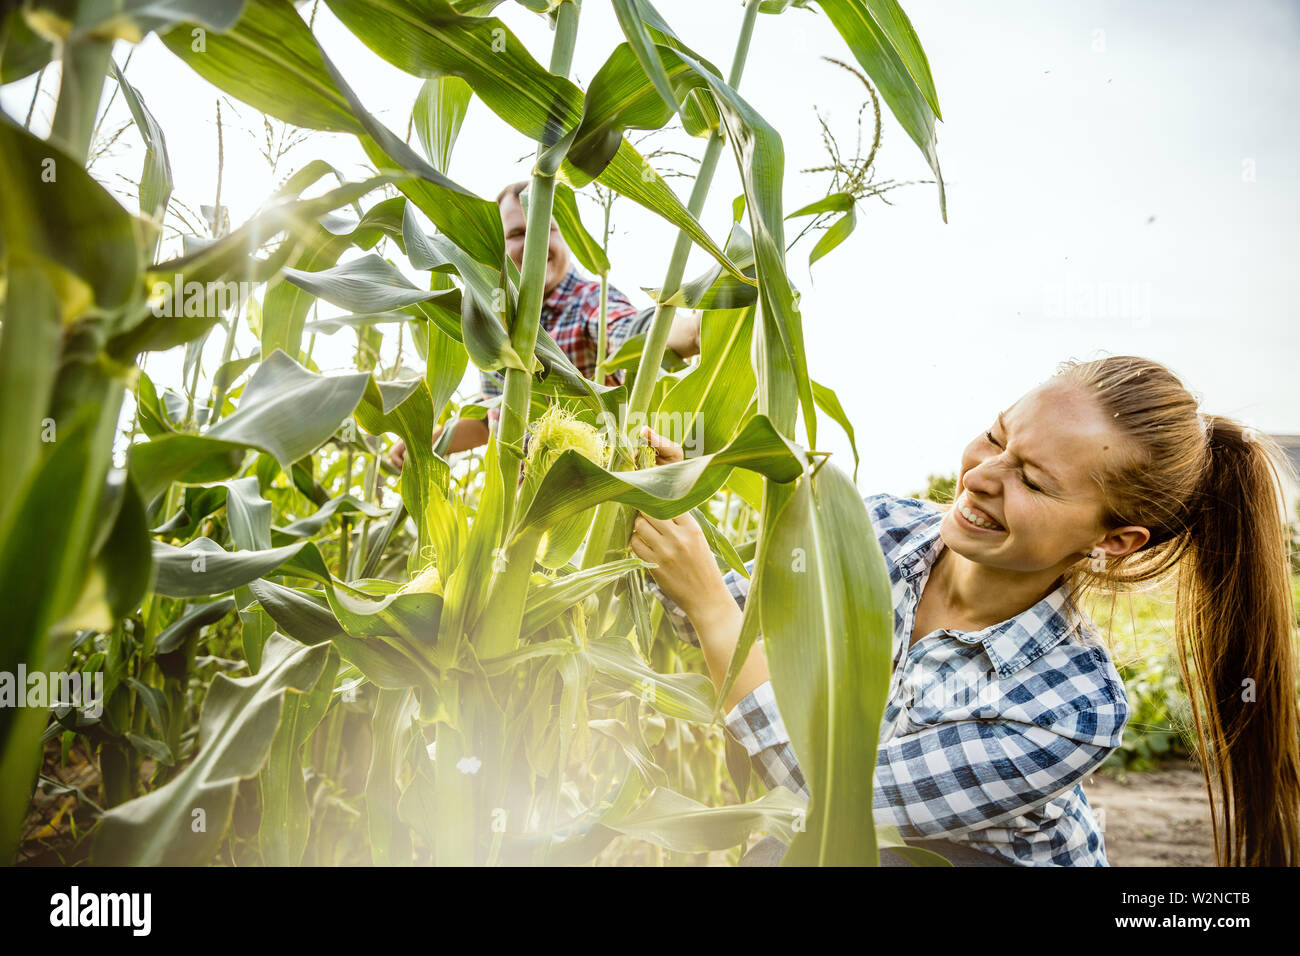 Young and happy farmer's couple at their garden in sunny day. Man and woman engaged in the cultivation of eco friendly products. Concept of farming, agriculture, healthy lifestyle, family occupation. Stock Photo